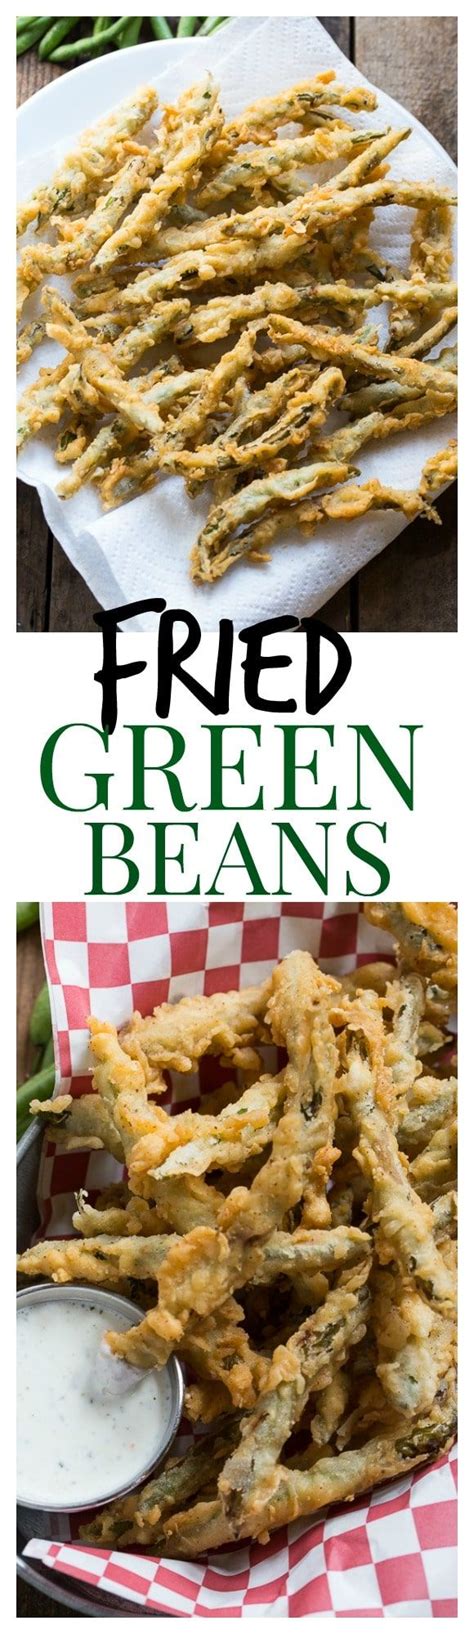 Fresh green beans are steamed and then canned with a clove of garlic and sprigs of fresh dill. Pin by KEN on hungry | Fried green beans, Fair food ...